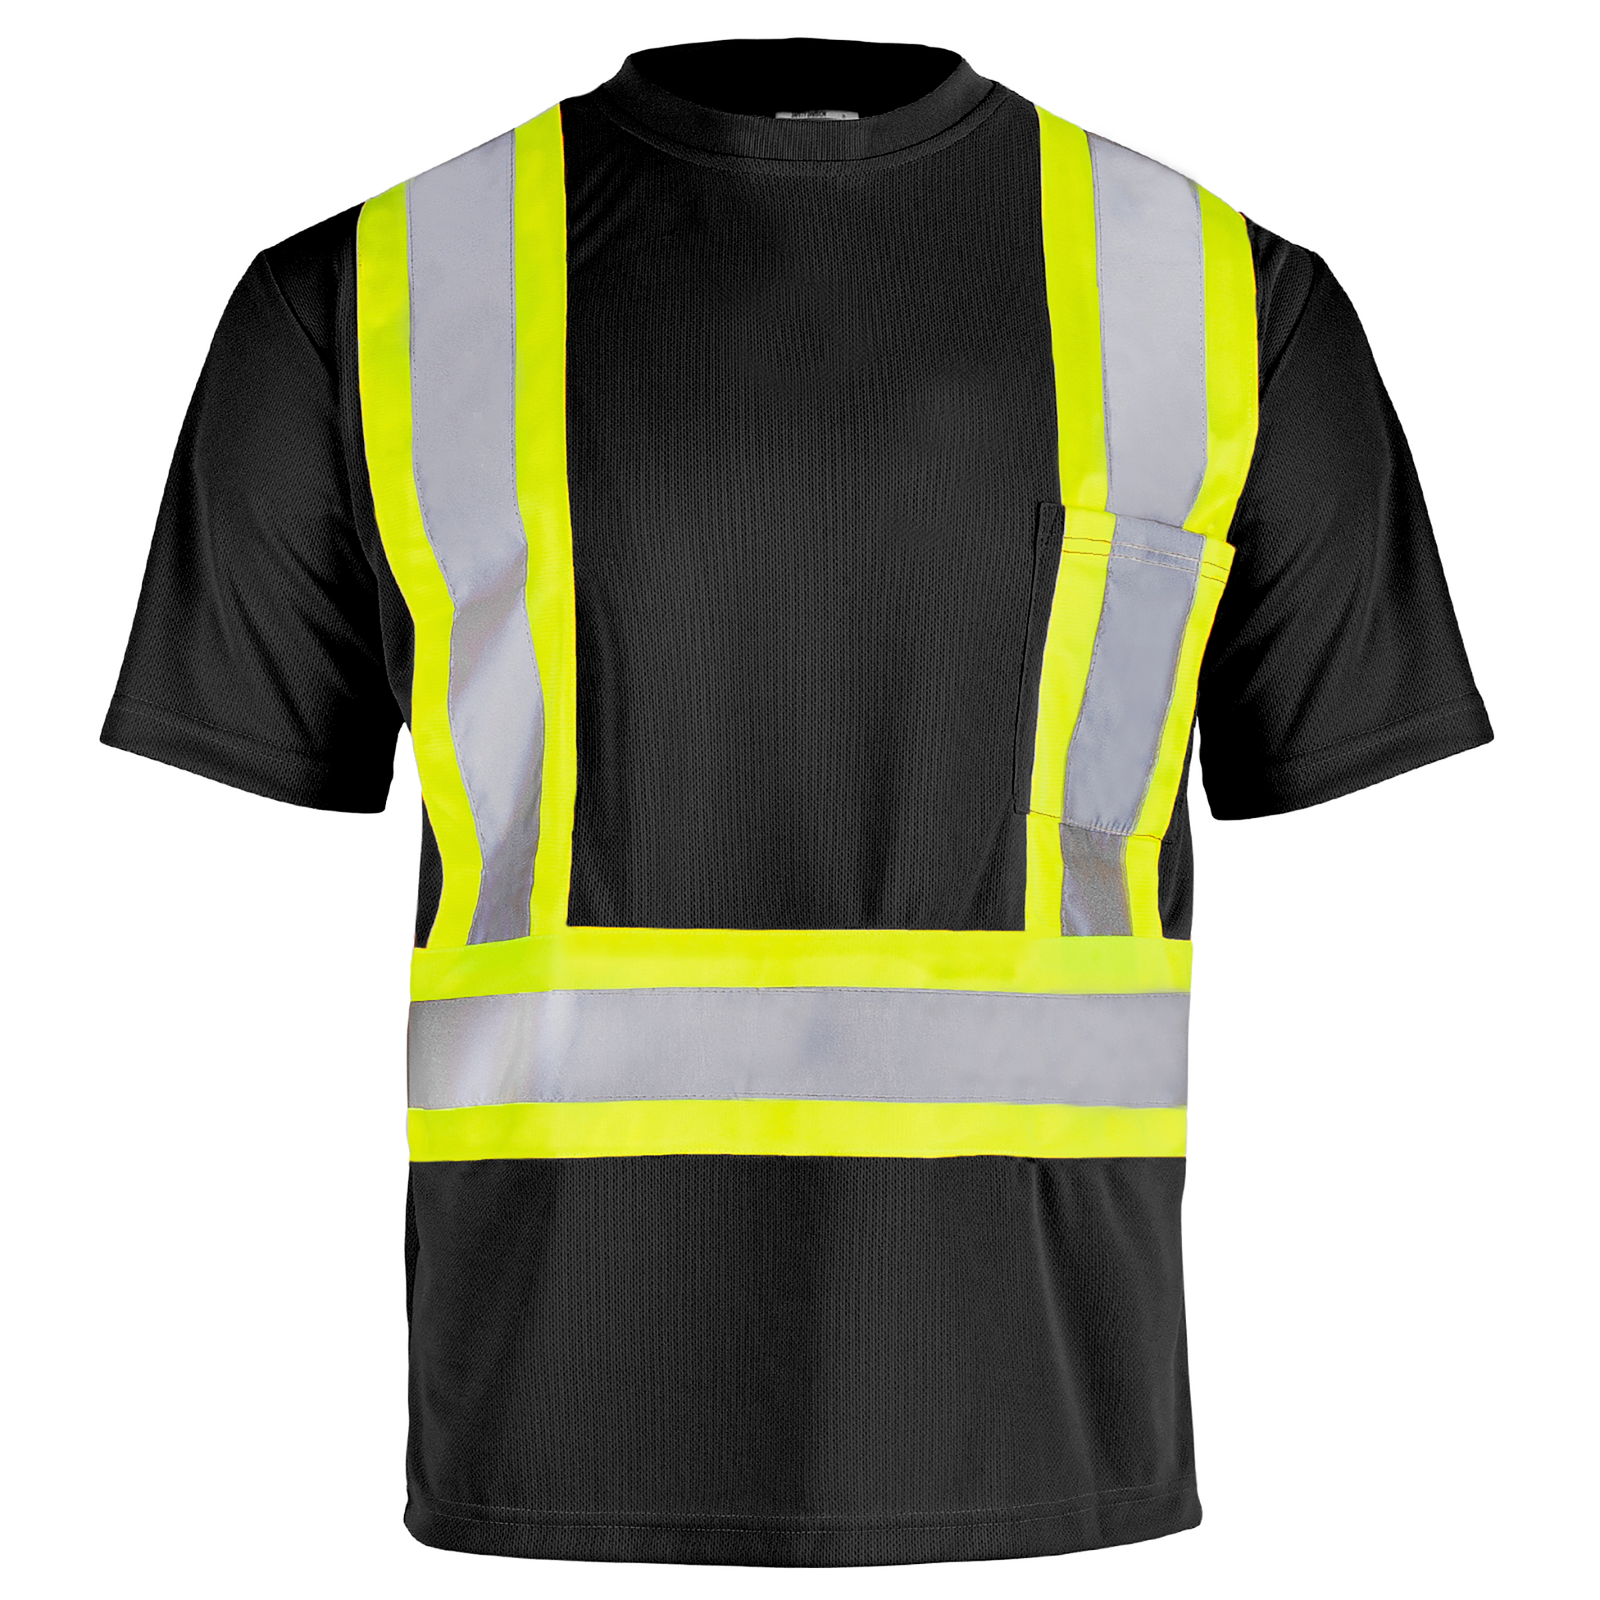 Hi-vis ANSI compliant reflective two tone black and yellow safety shirt